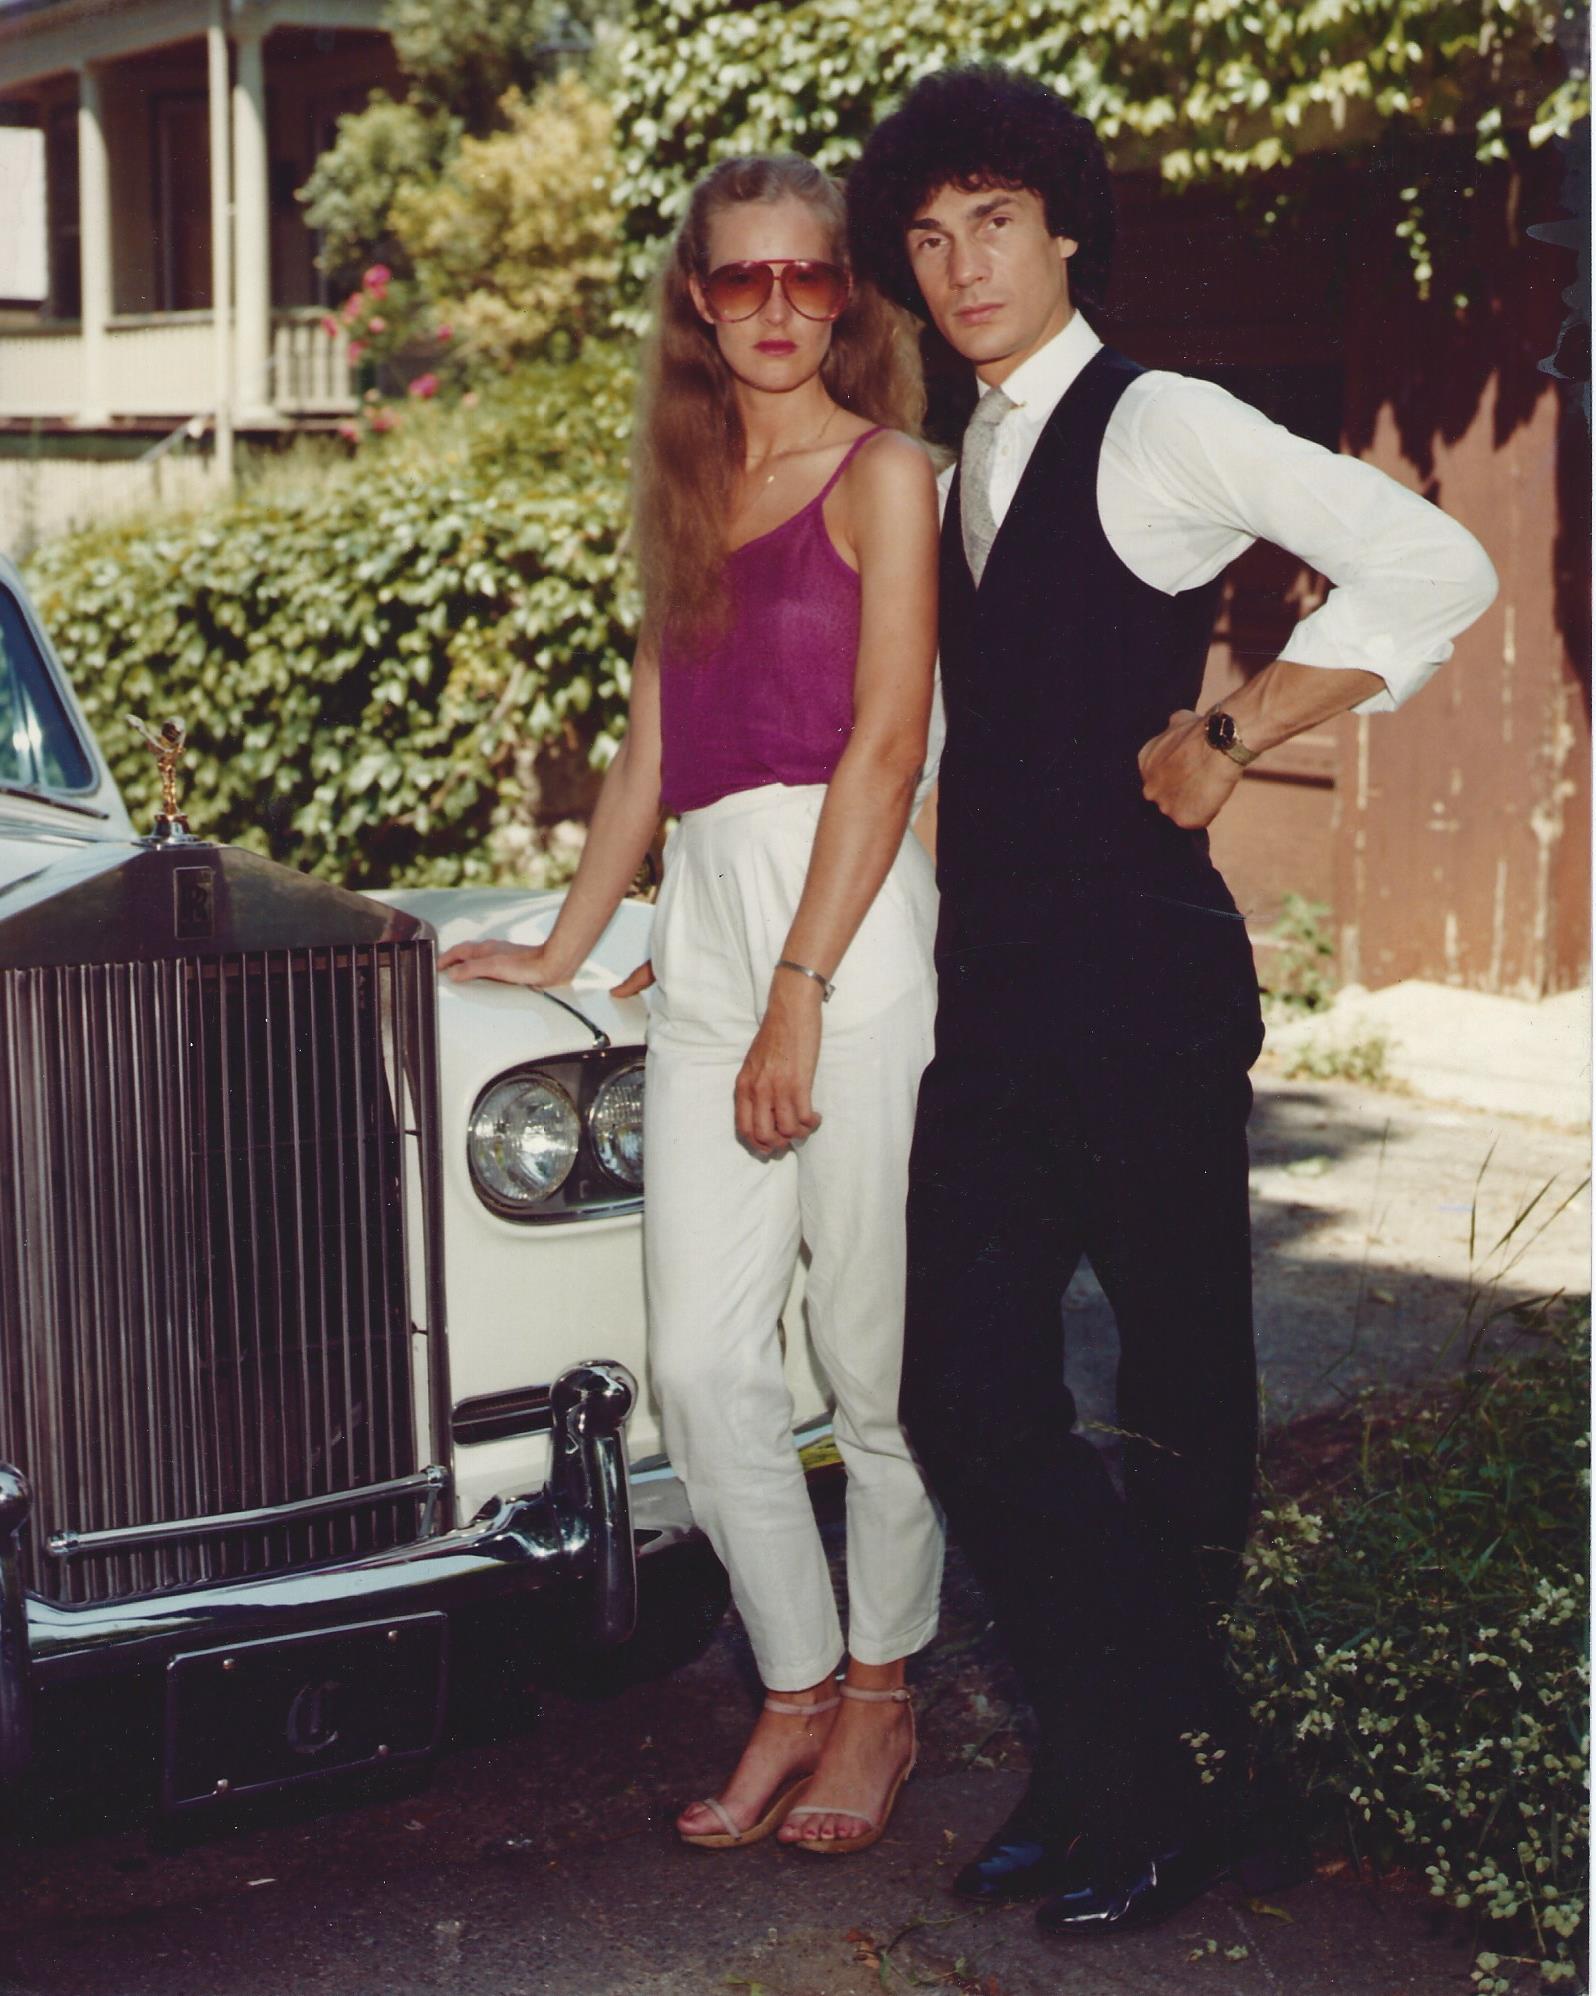 Summer of '79 with Linda Pope and the star of the show a 1962 Rolls Royce Phantom 6 Right Hand Drive Coachwork by James Young